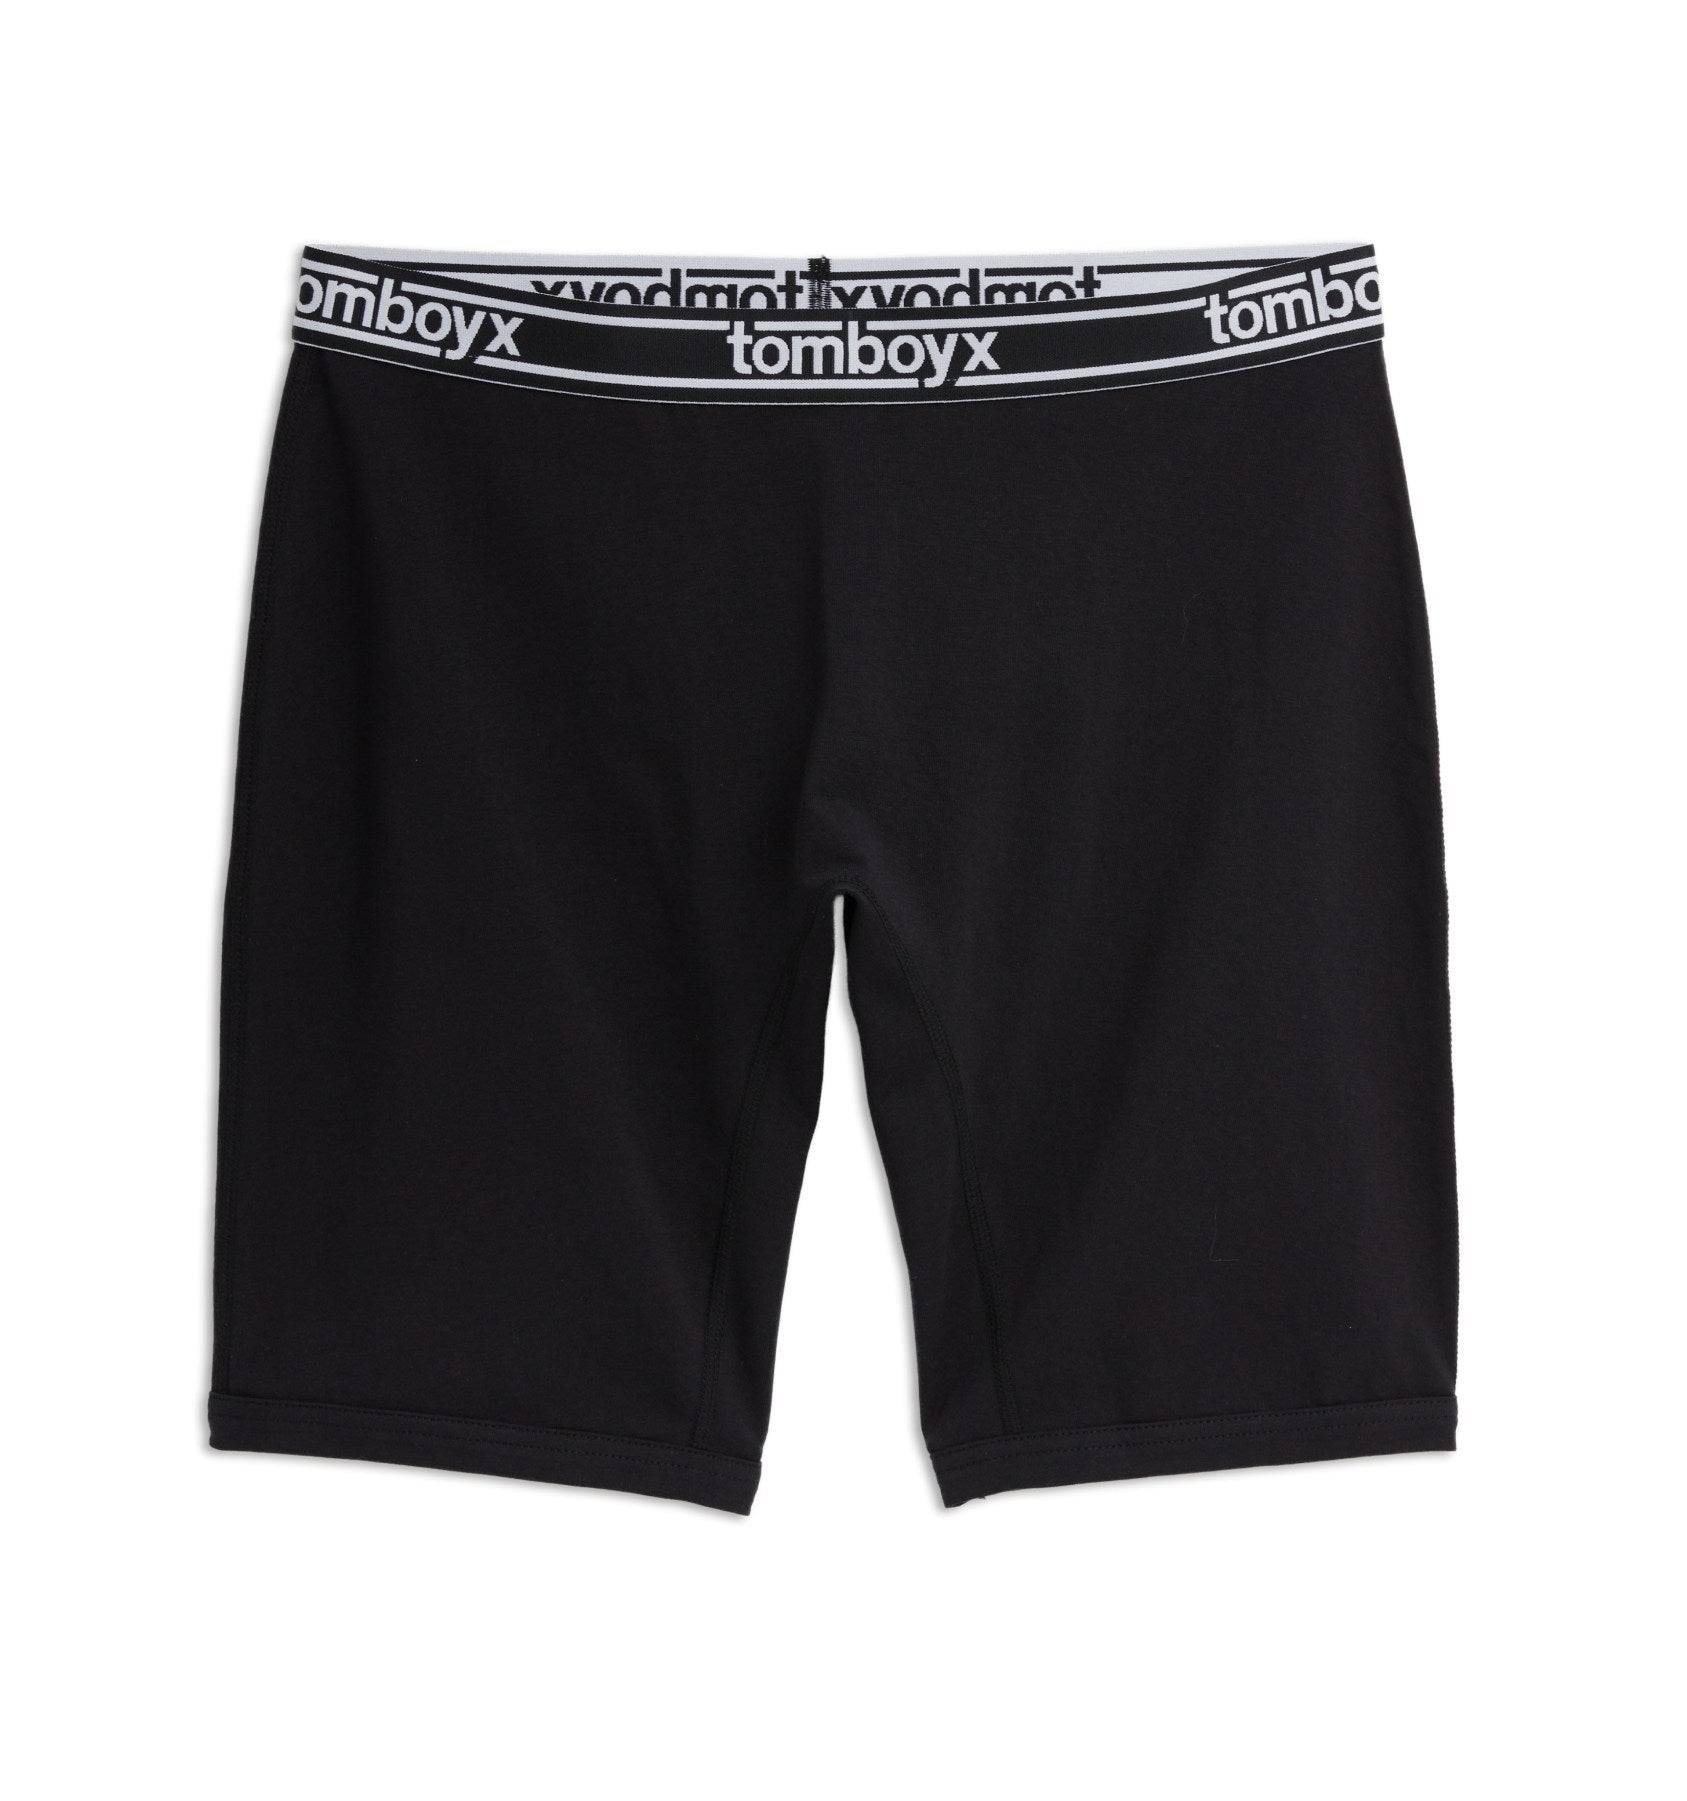 9 Inch Boxer Briefs  TomboyX - Comfortable, Soft, Breathable Women's Boxers  Designed for Every Body